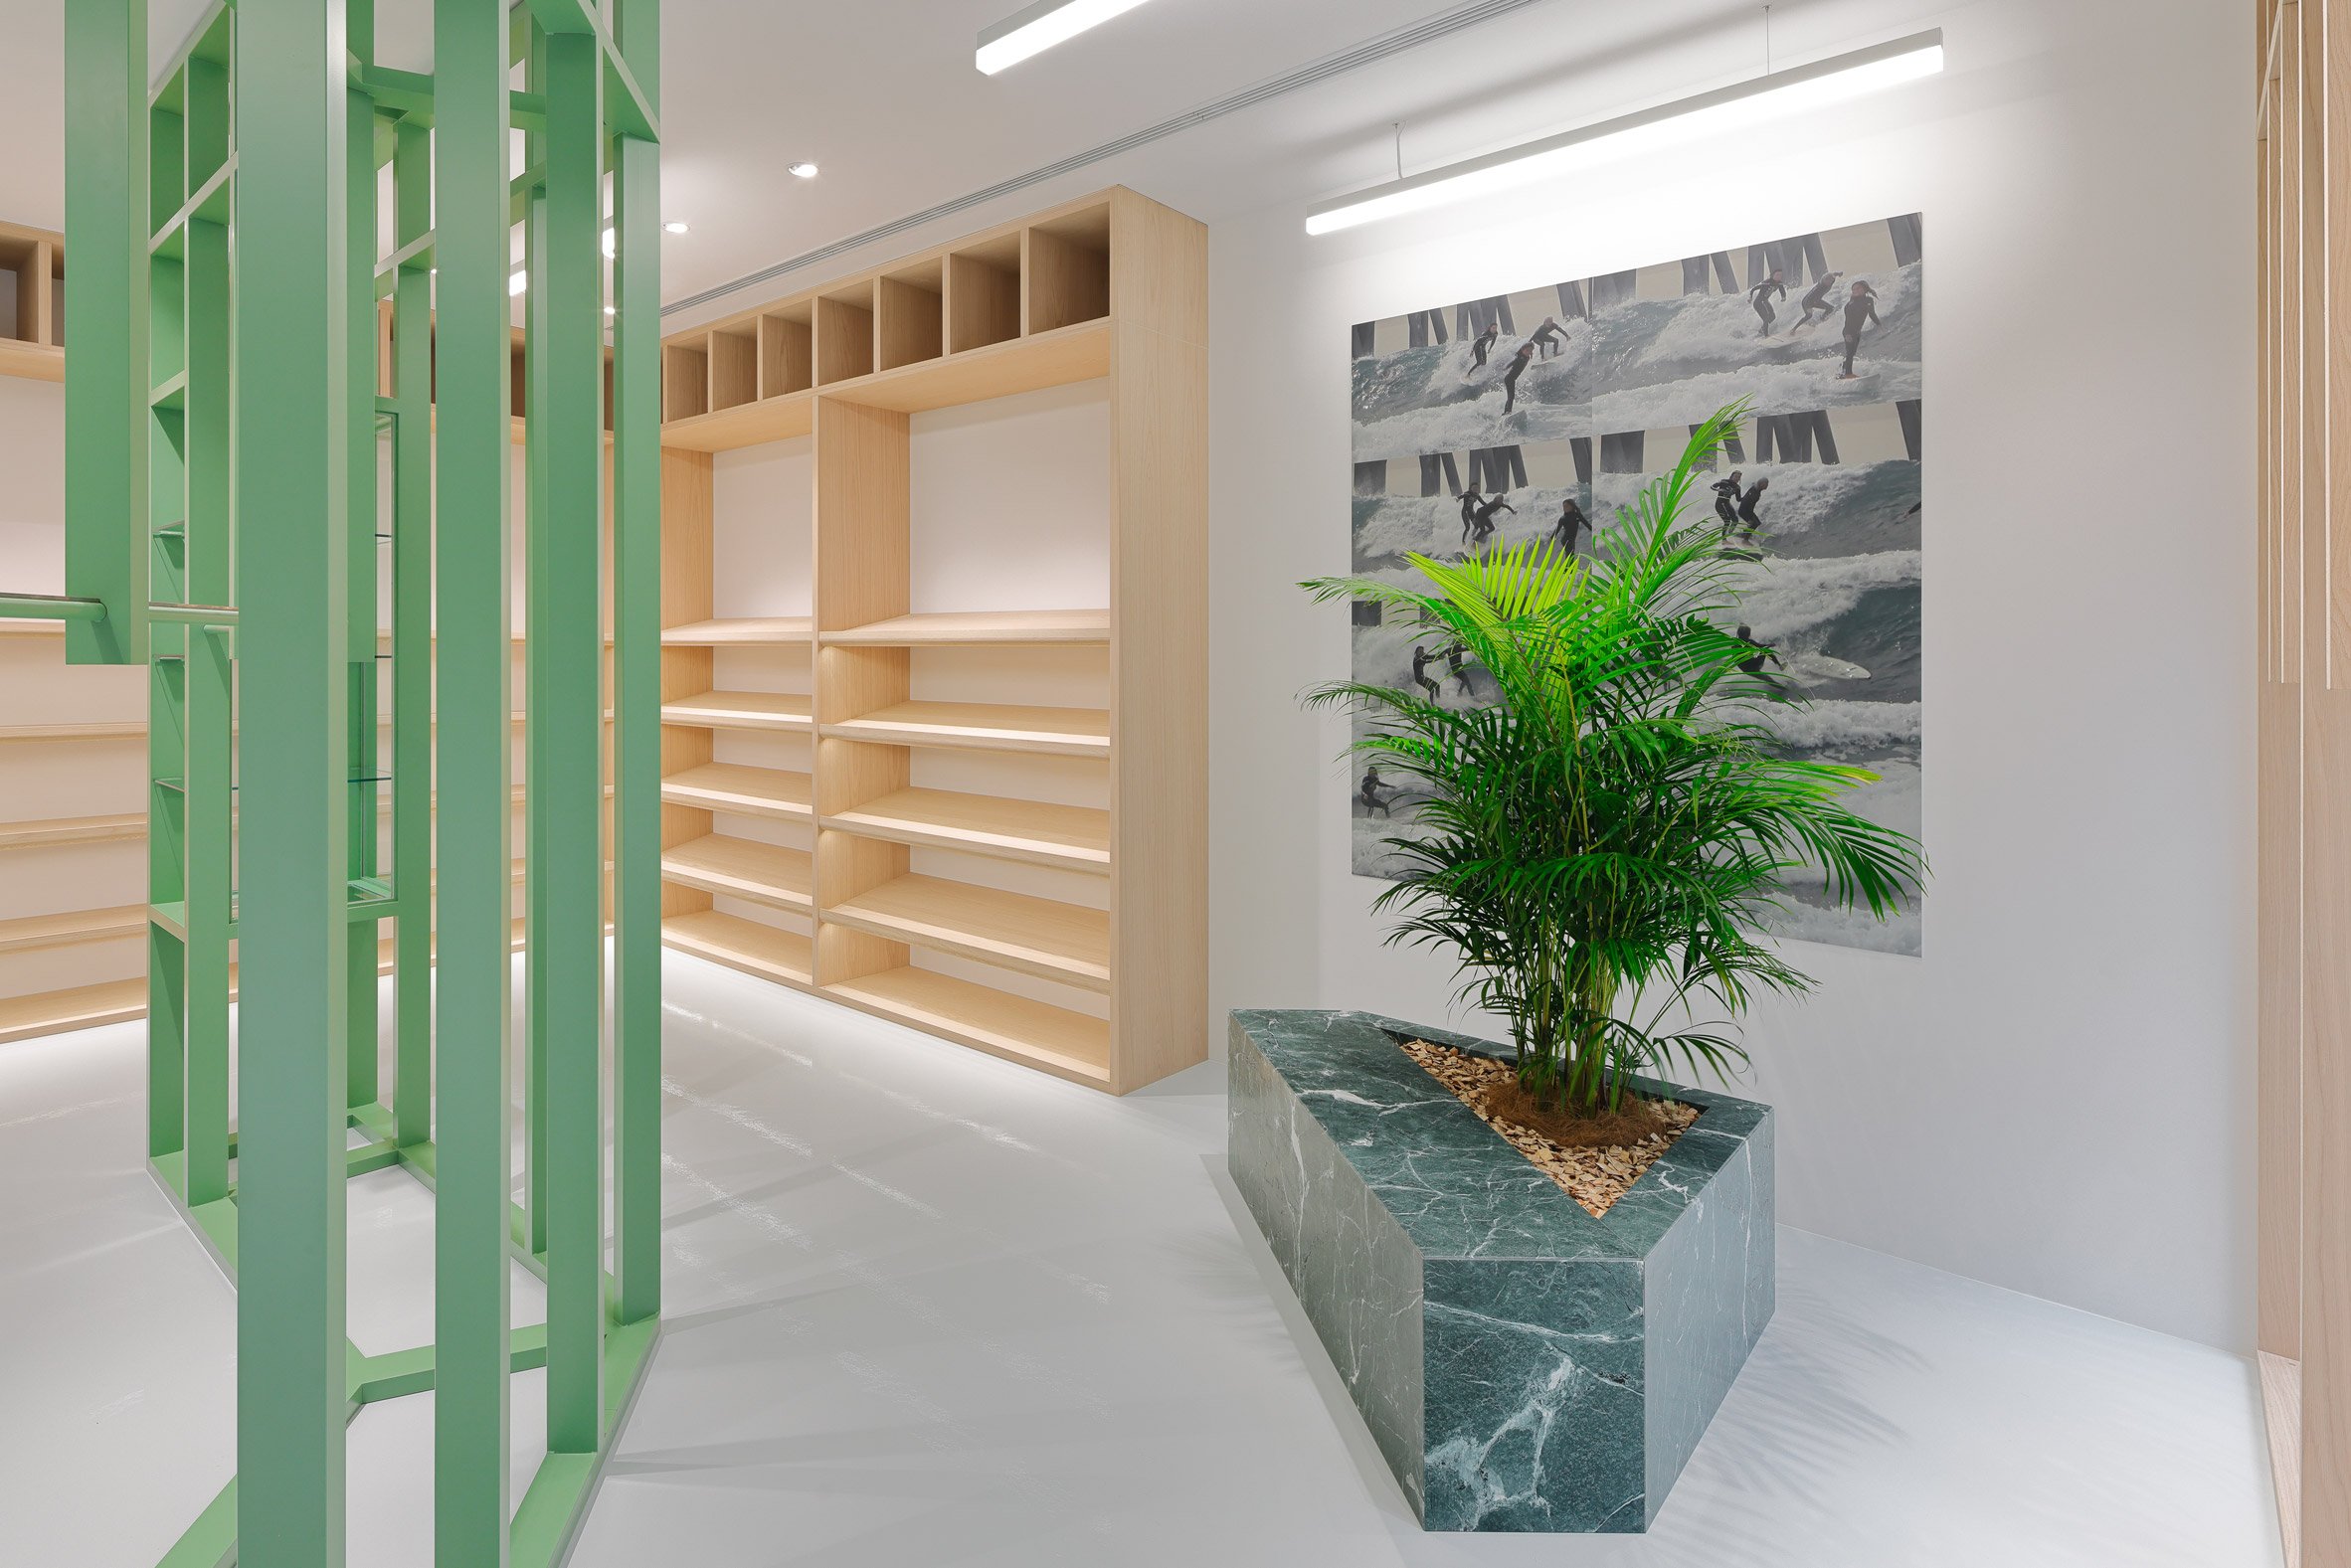 Green and wood shelving with green marble planter in Stüssy Shibuya store